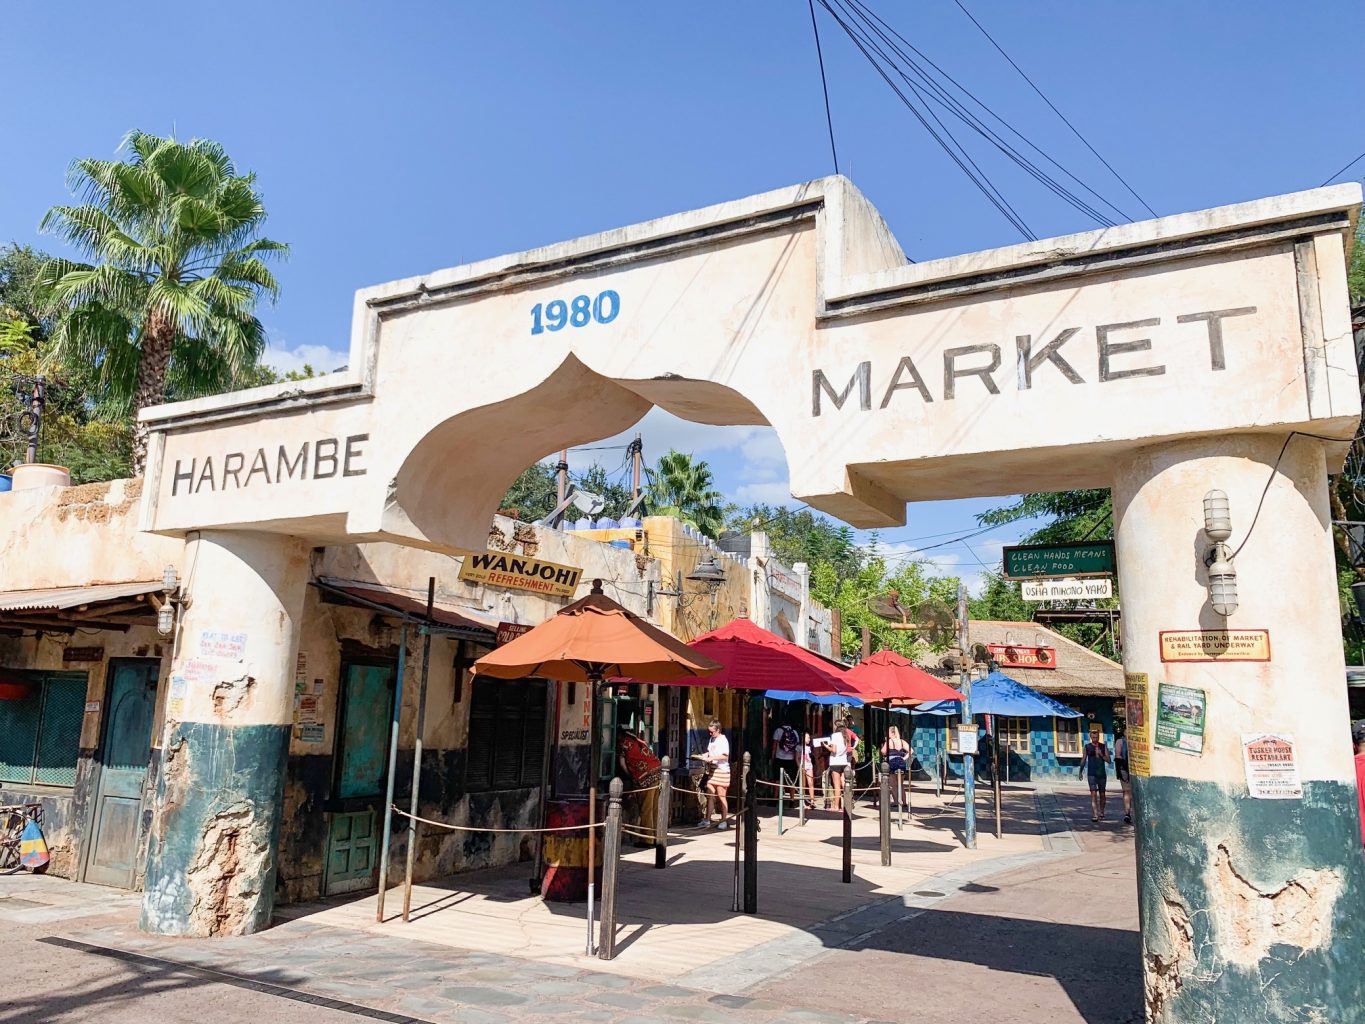 The battered, worn down walk way of Harambe Market features a quick little stop of Wanjohi Refreshments, which is one of the best Animal Kingdom restaurants for drinks!